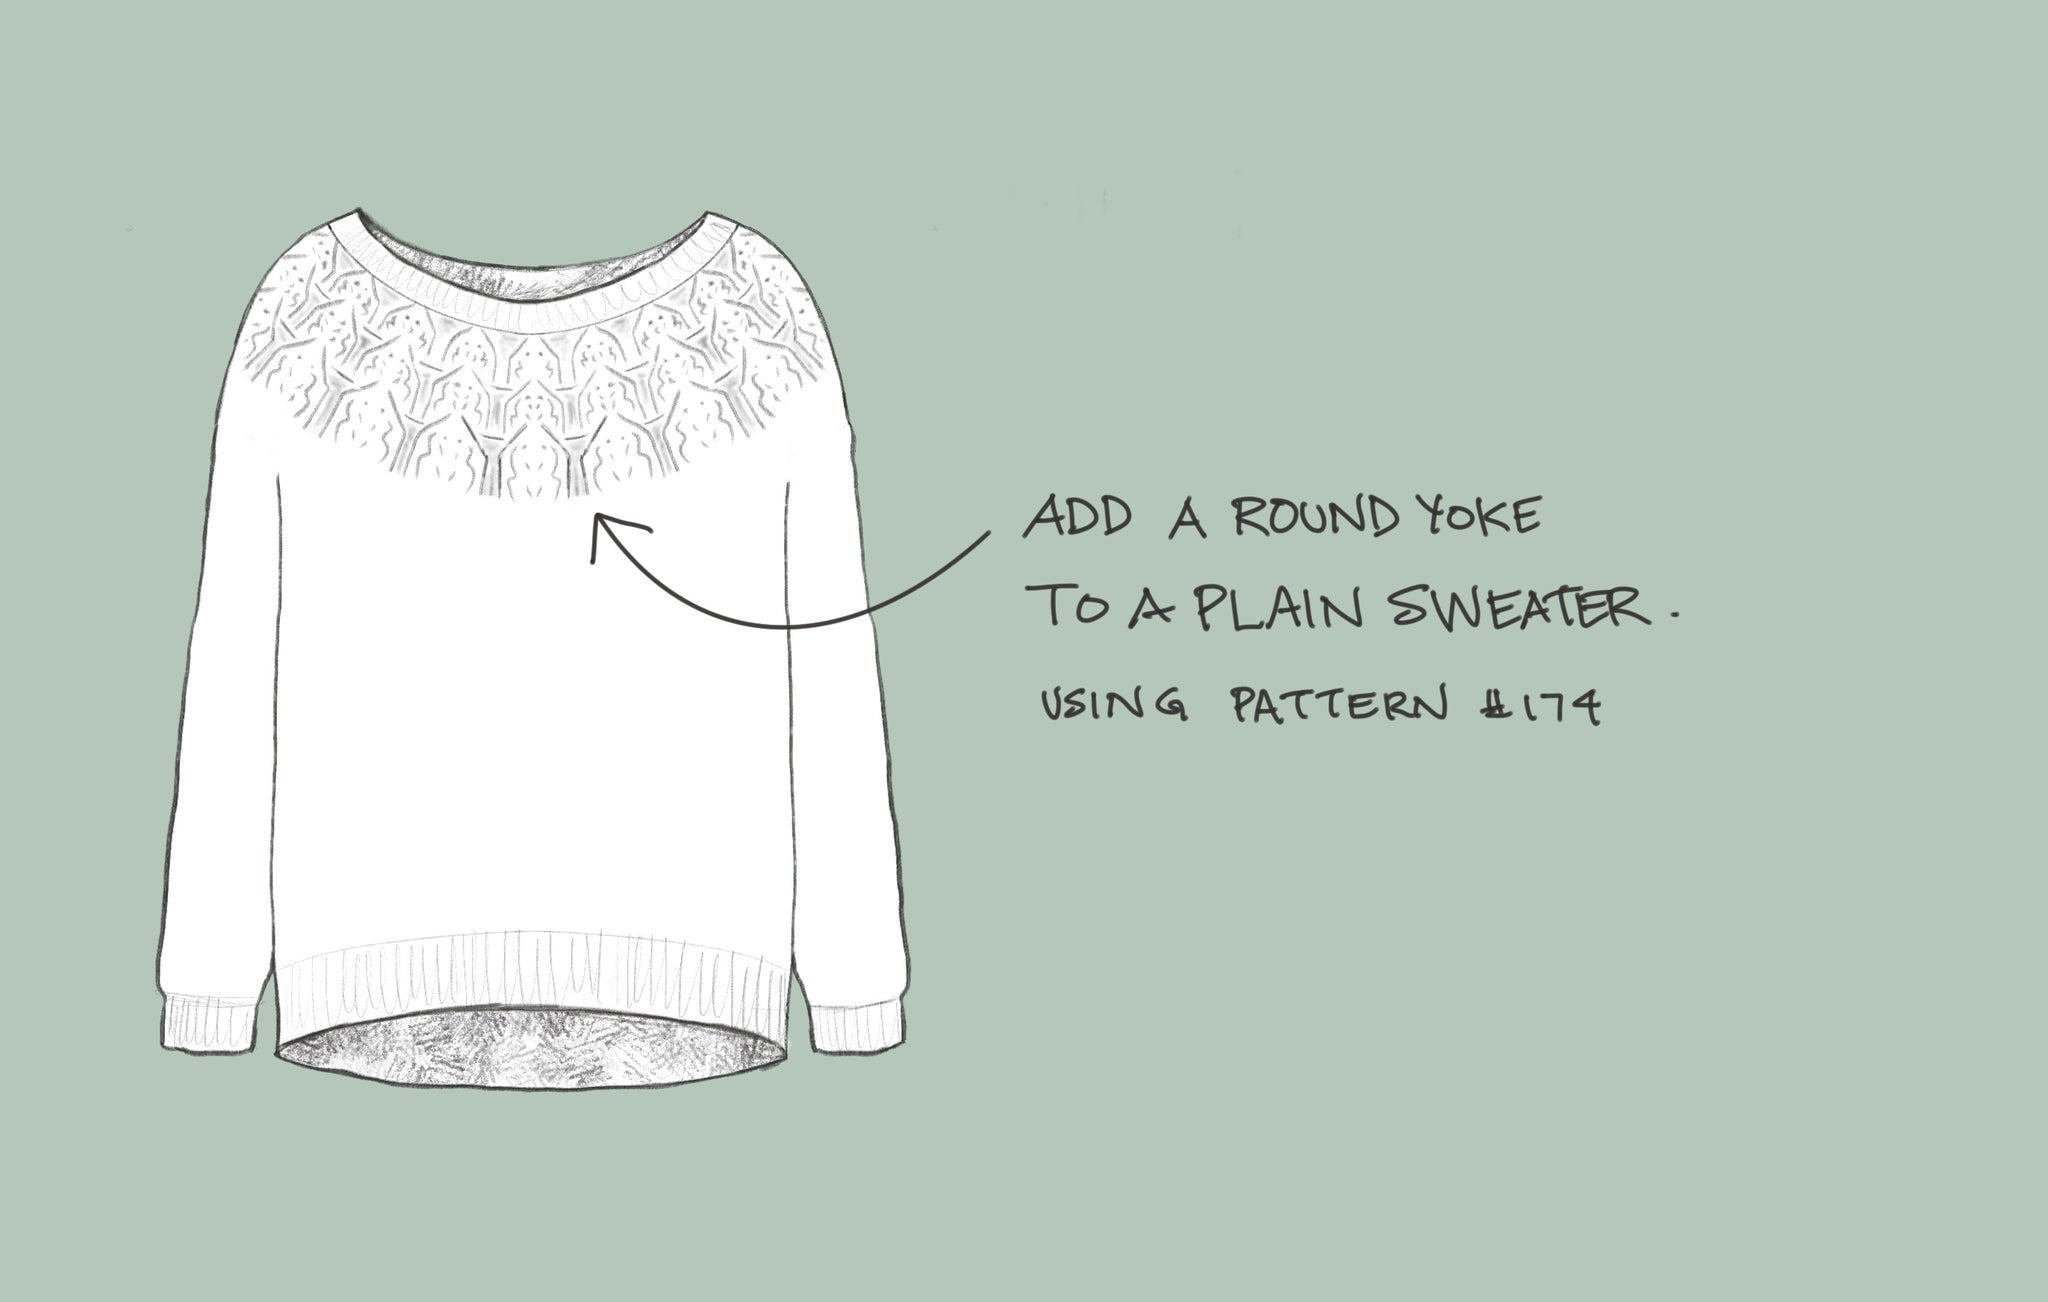 Sketch of a sweater with a round yoke